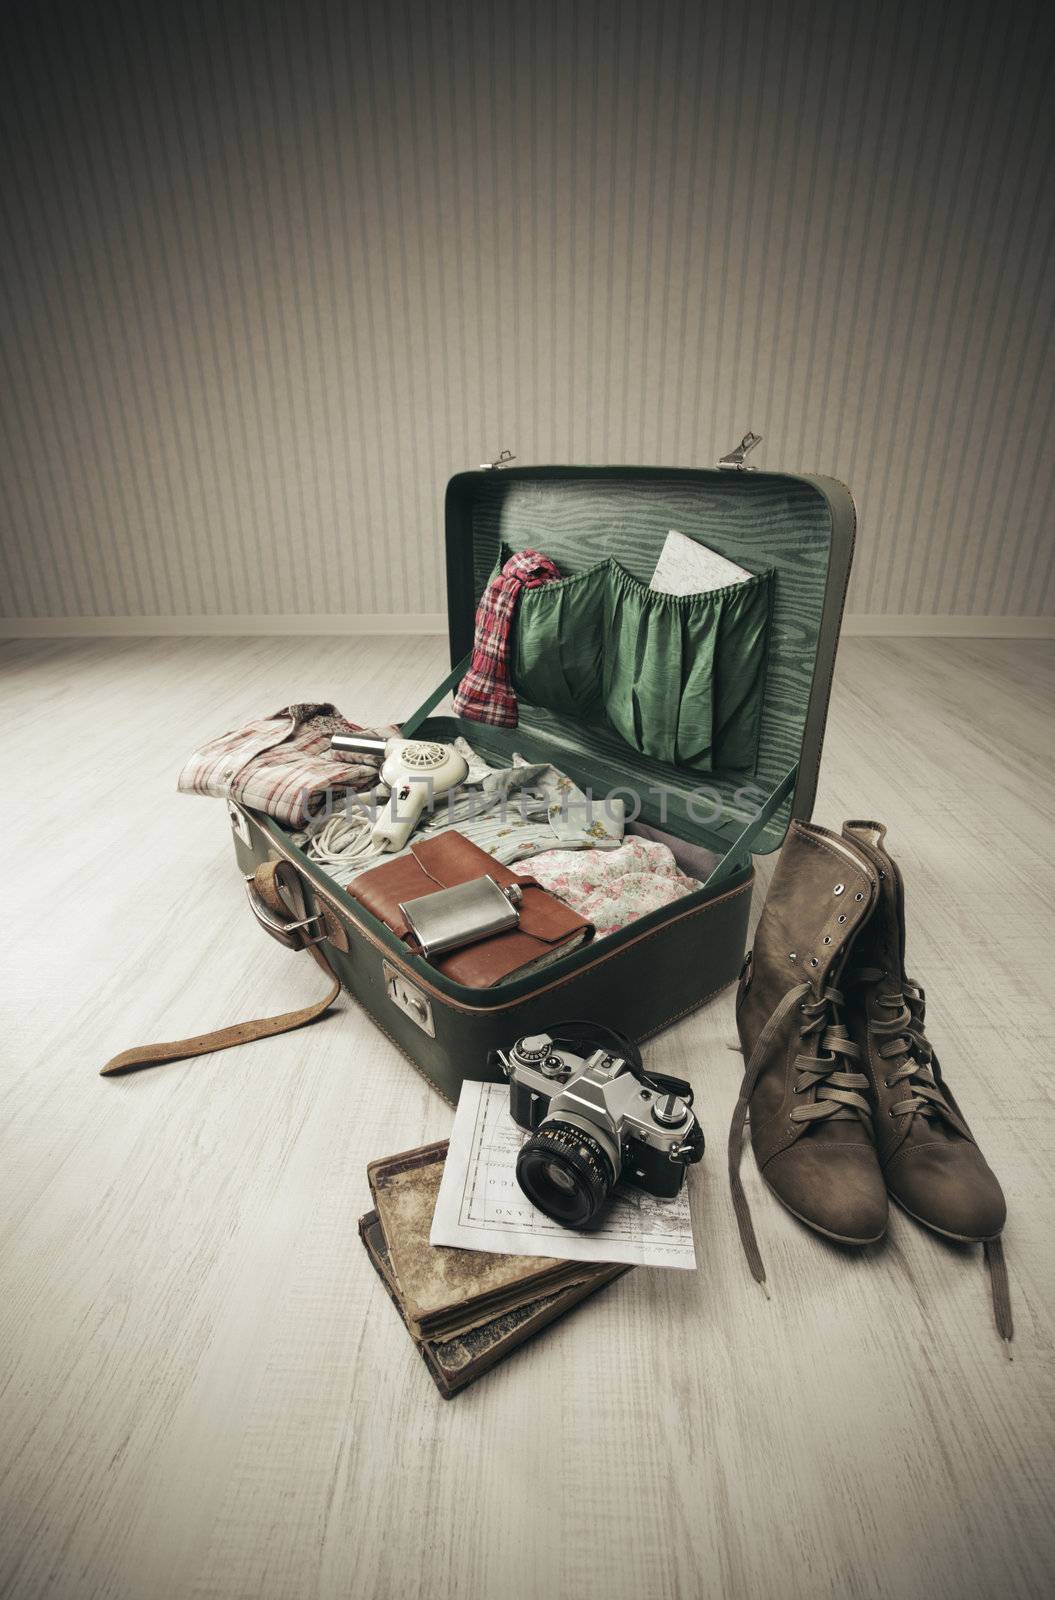 Packed Vintage Suitcase by stokkete